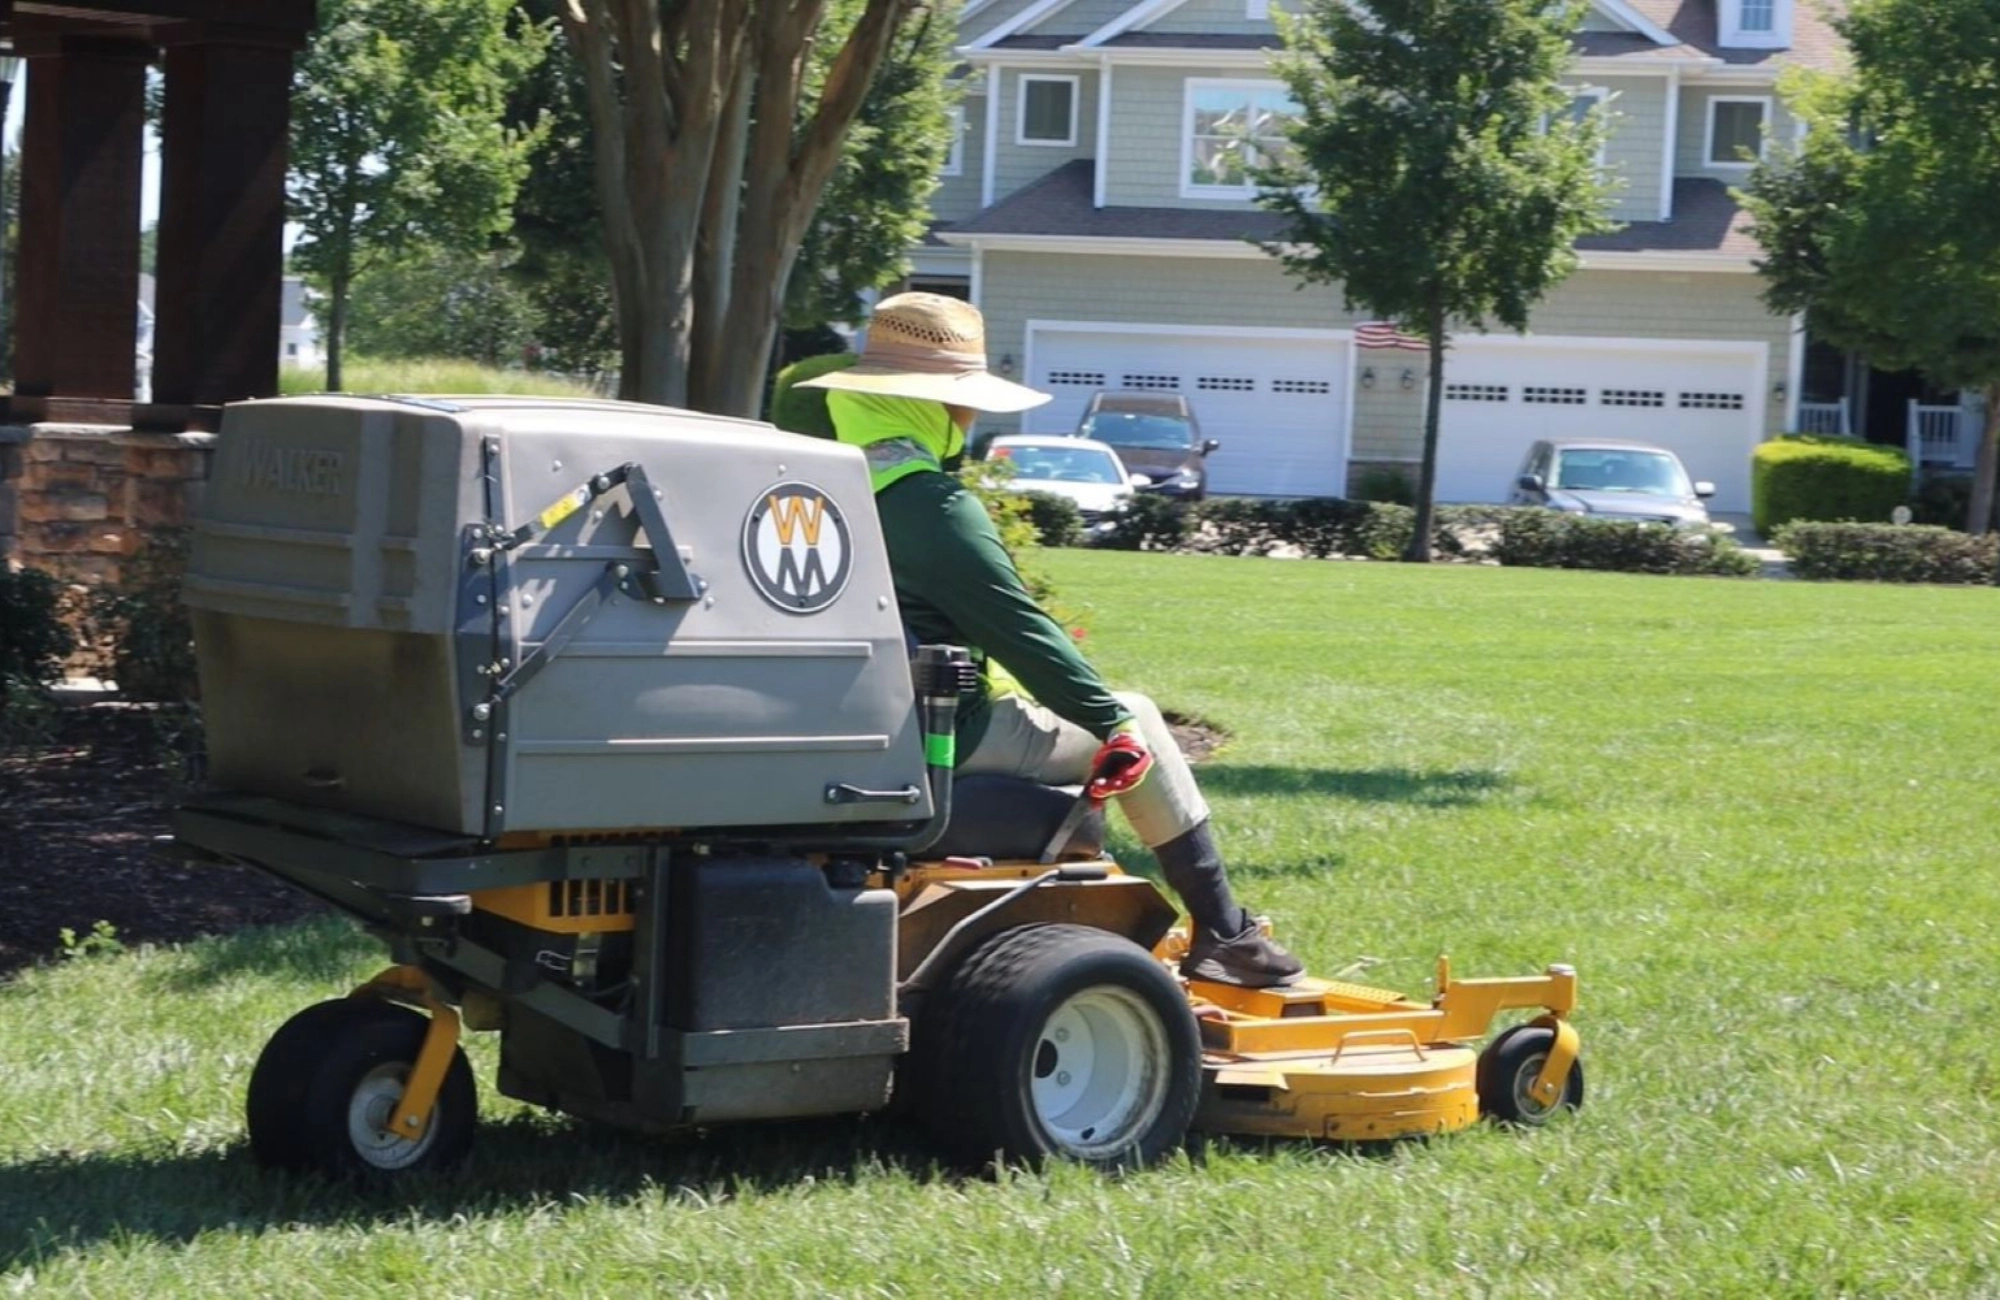 <p>The mowing service is very important as it is something that you see every week and it makes up the primary cost in many of our landscape management plans. We focus on providing a value-added quality cut each week that will improve aesthetics while mitigate the probability of damage. How do we do this? We strategically utilize specialty mowers that are lighter on the turf, designed with front-mounted decks and are intended to bag the turf. As a result, our customers experience minimized rutting on the turf, a noticeably better-quality cut, a cleaner cut with reduced clippings in the ornamental beds and better overall weed control.</p>